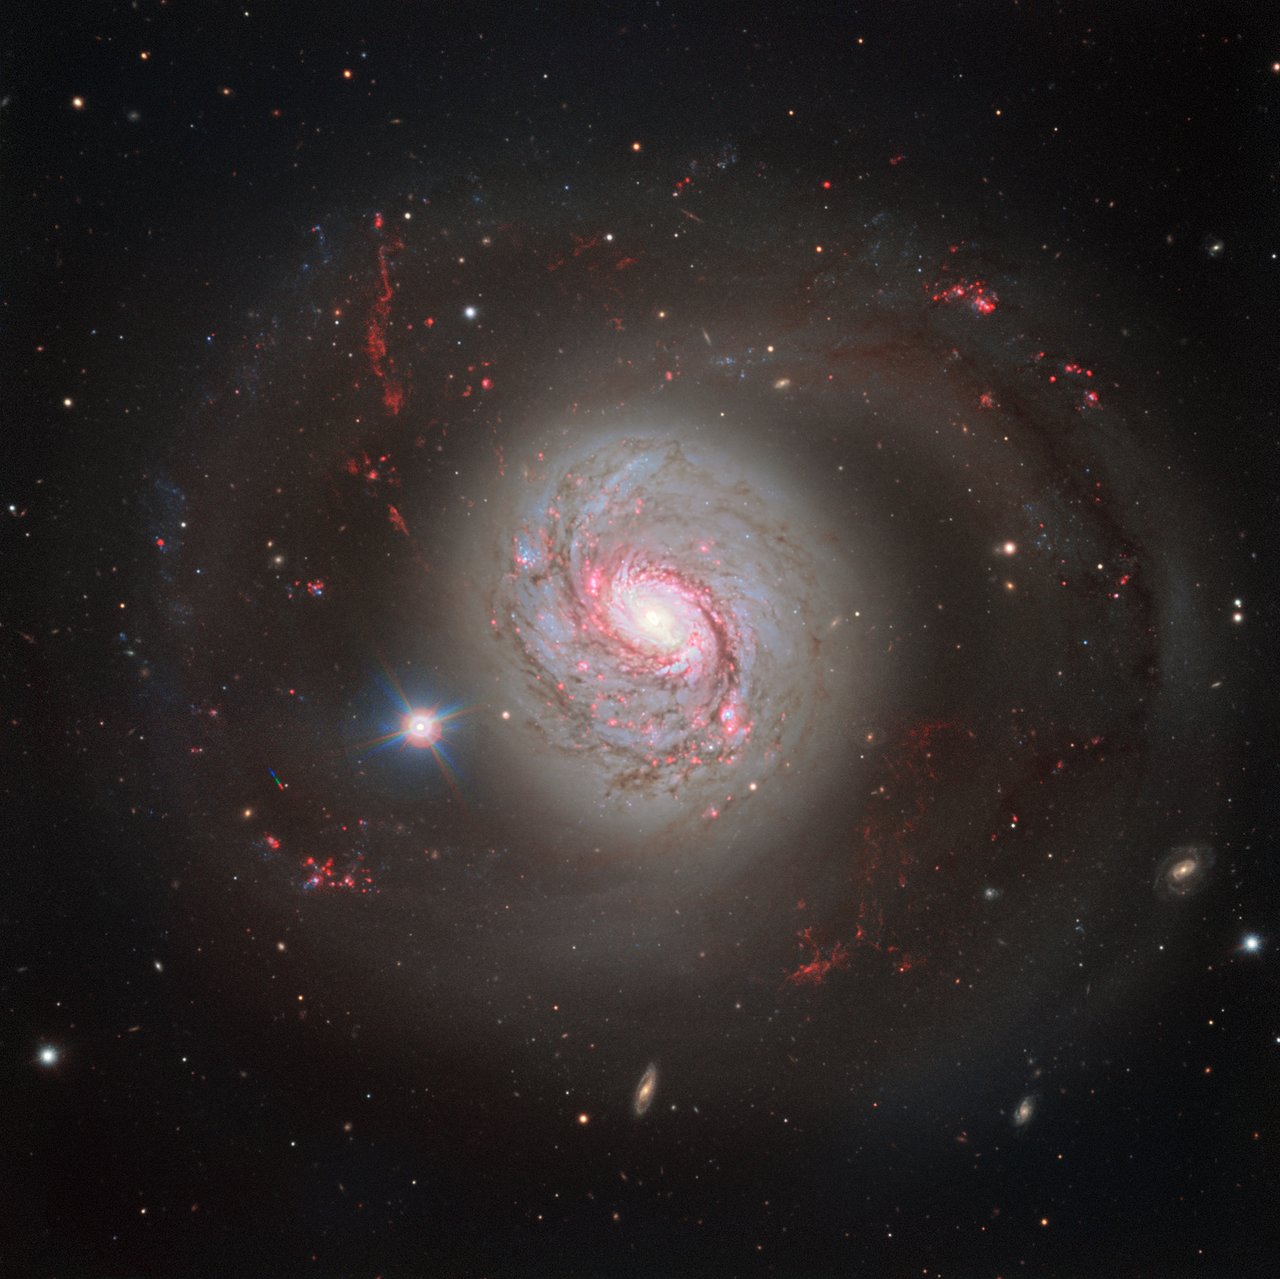 ESO’s Very Large Telescope (VLT) has captured a magnificent face-on view of the barred spiral galaxy Messier 77. The image does justice to the galaxy’s beauty, showcasing its glittering arms criss-crossed with dust lanes — but it fails to betray Messier 77’s turbulent nature.